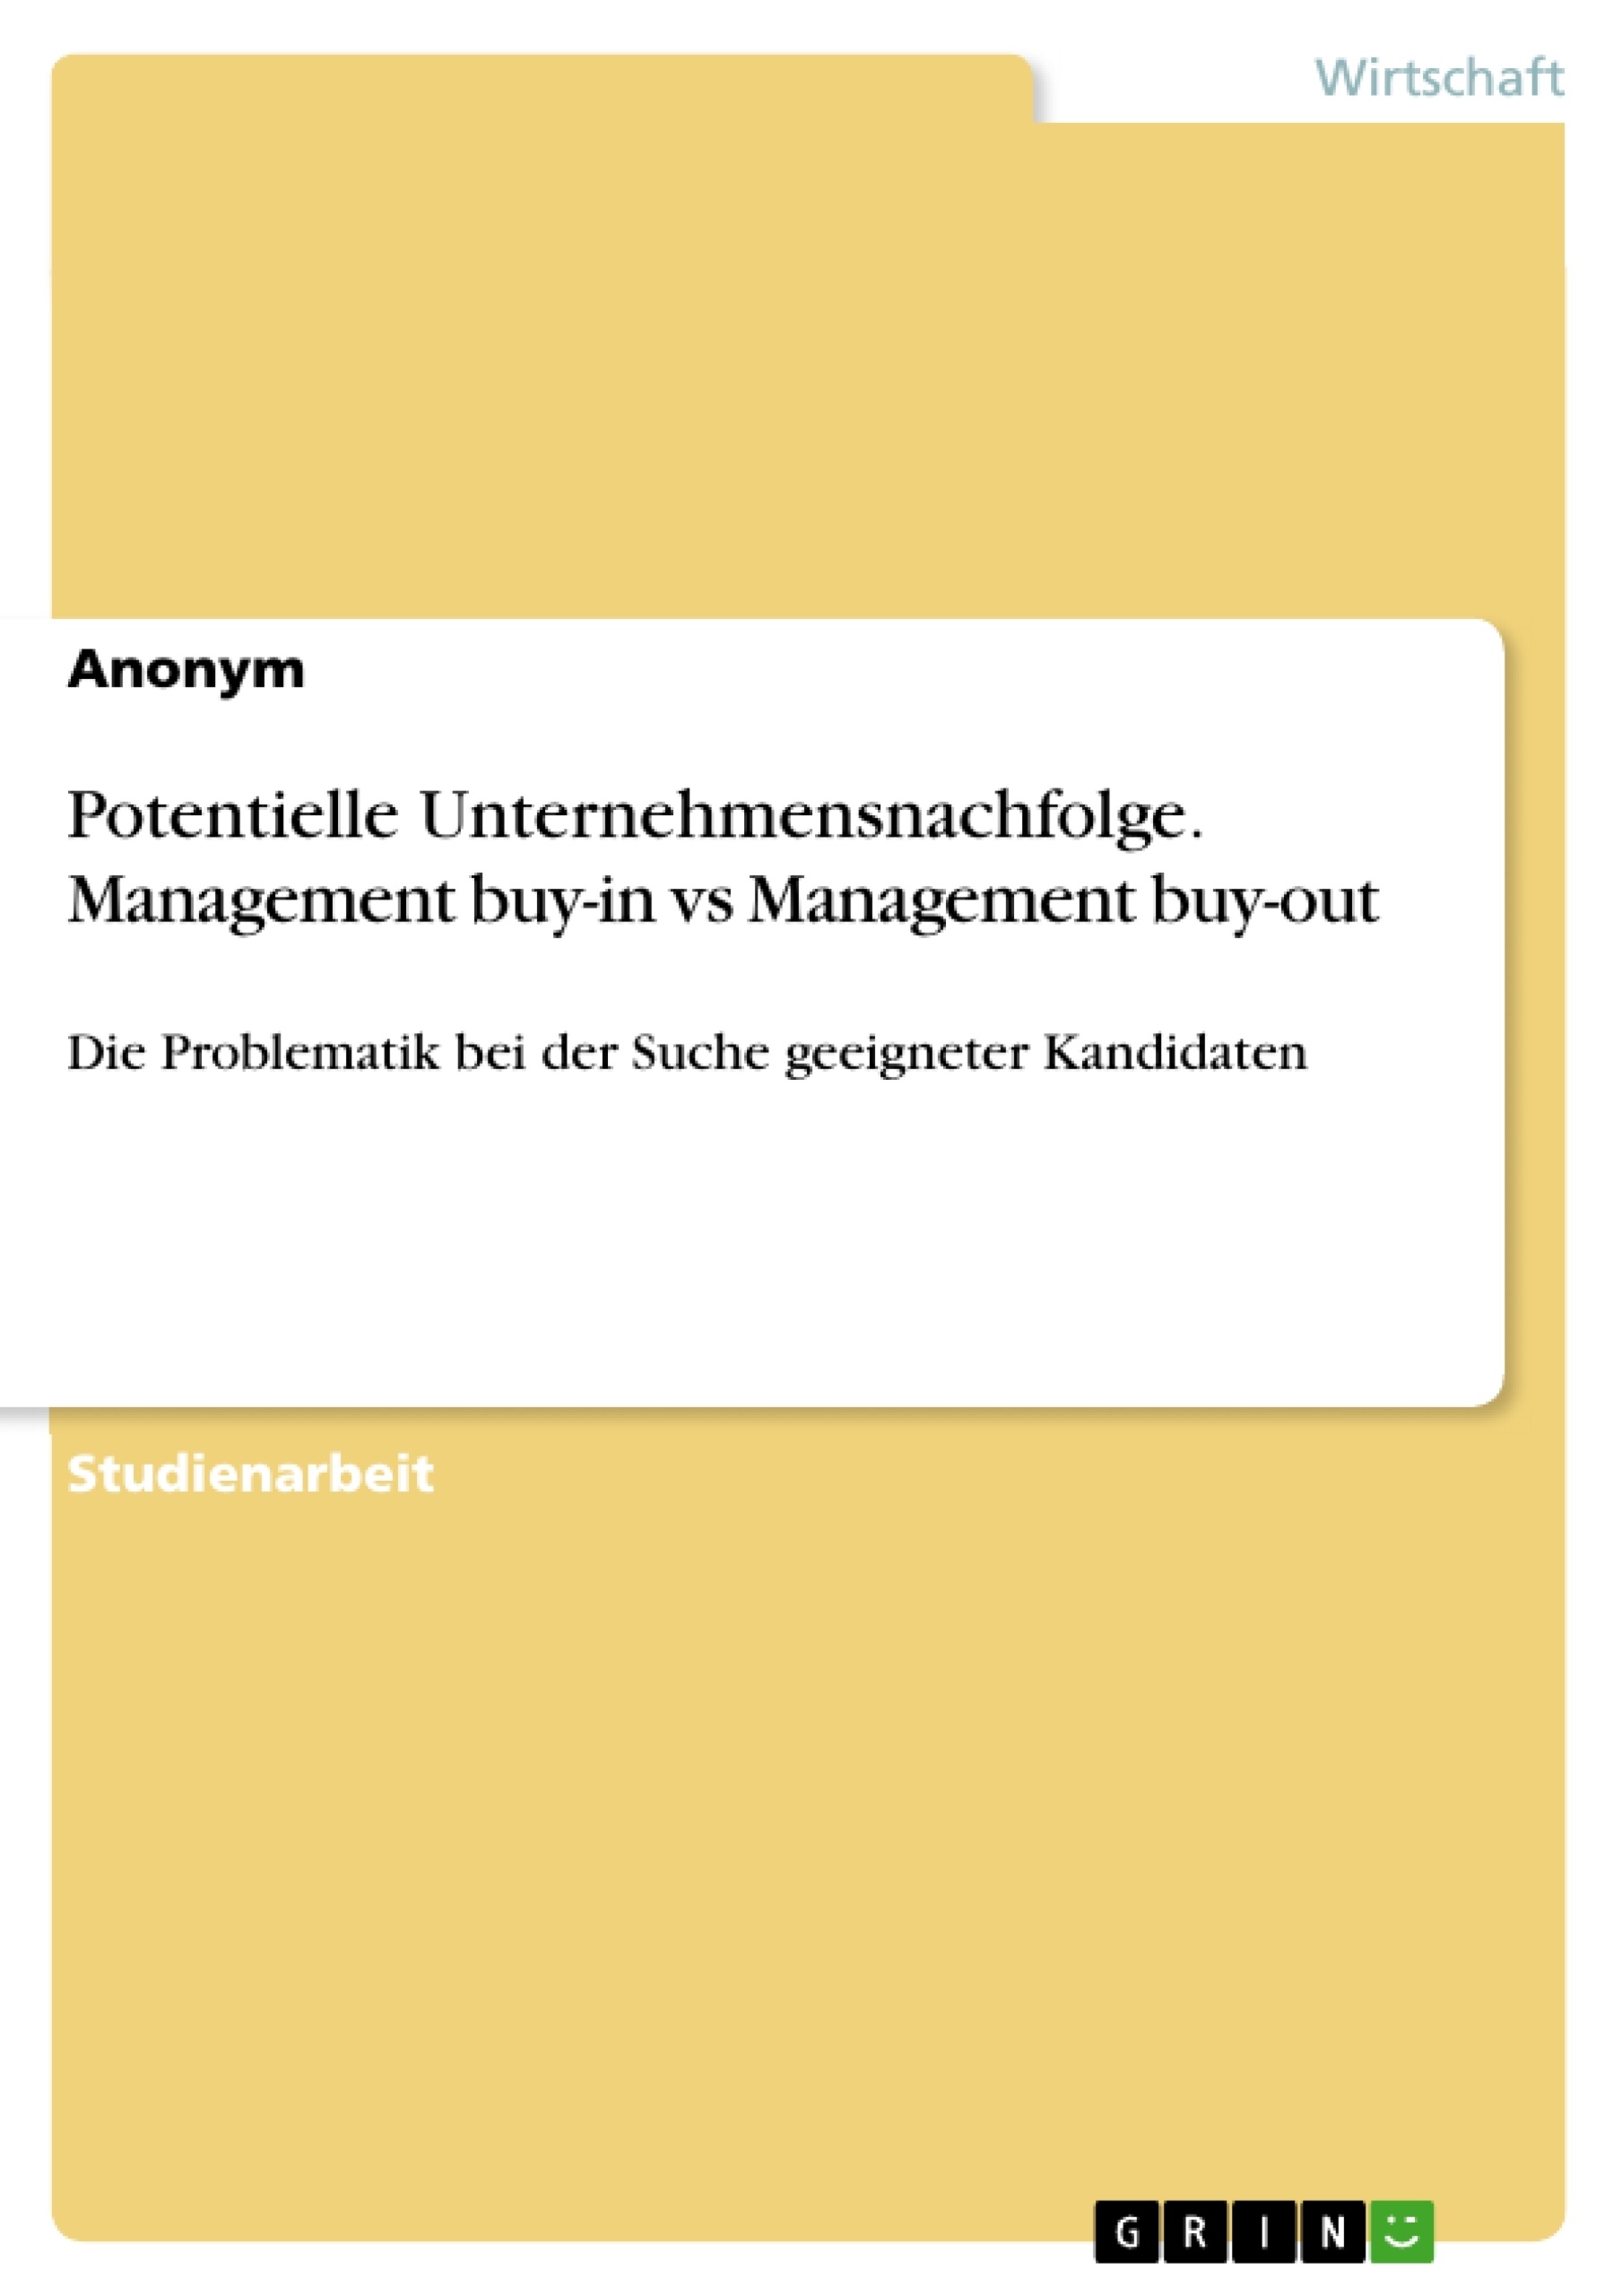 Título: Potentielle Unternehmensnachfolge. Management buy-in vs Management buy-out